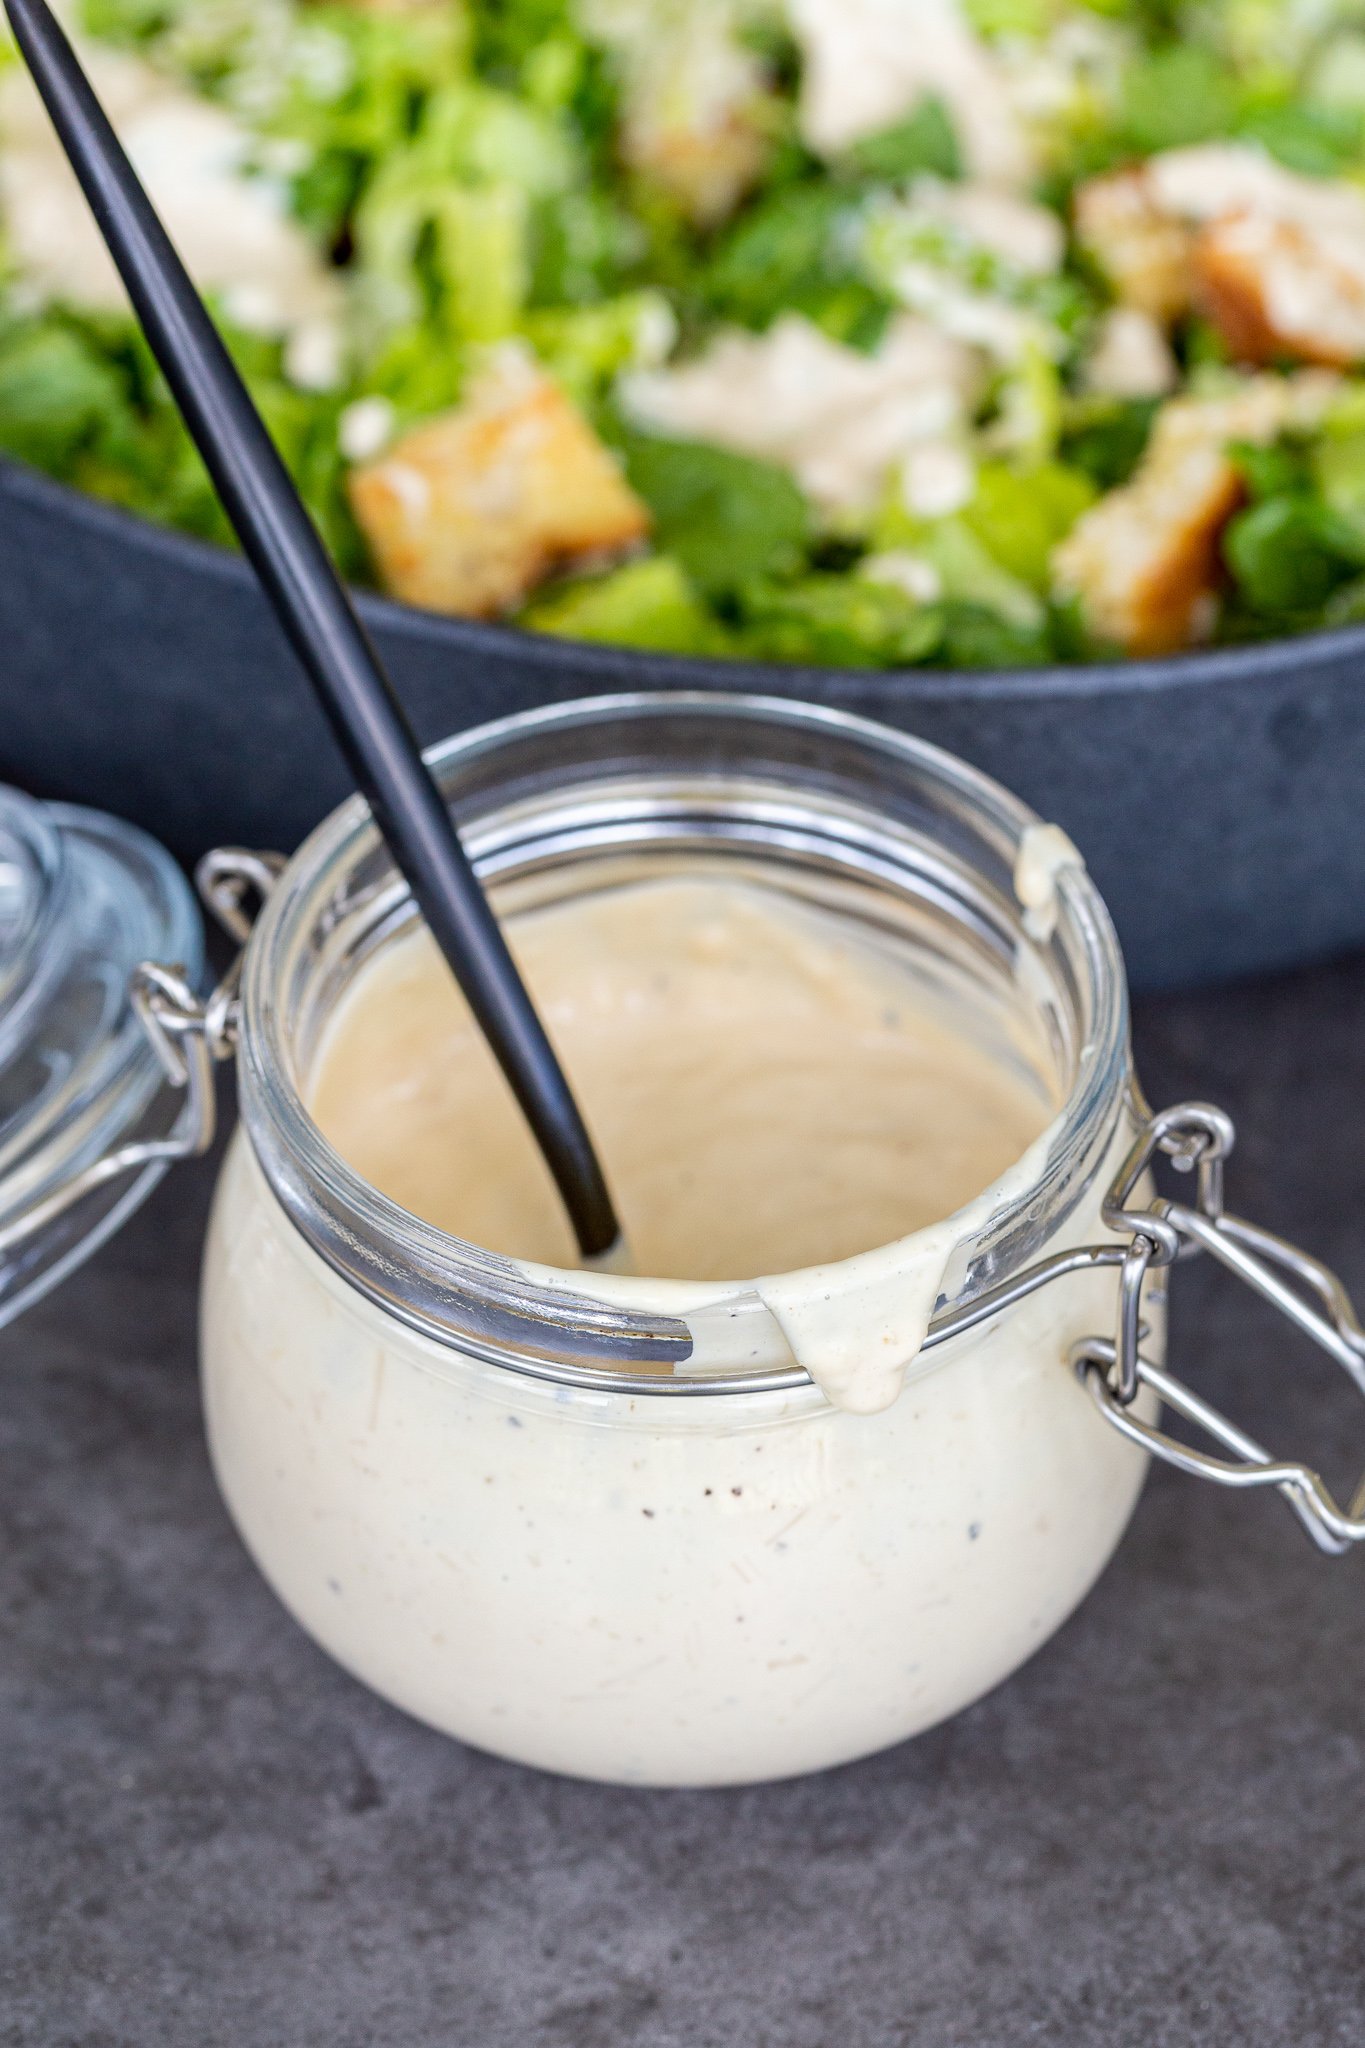 Salad dressing recipes: This is how easy it is in the blender!